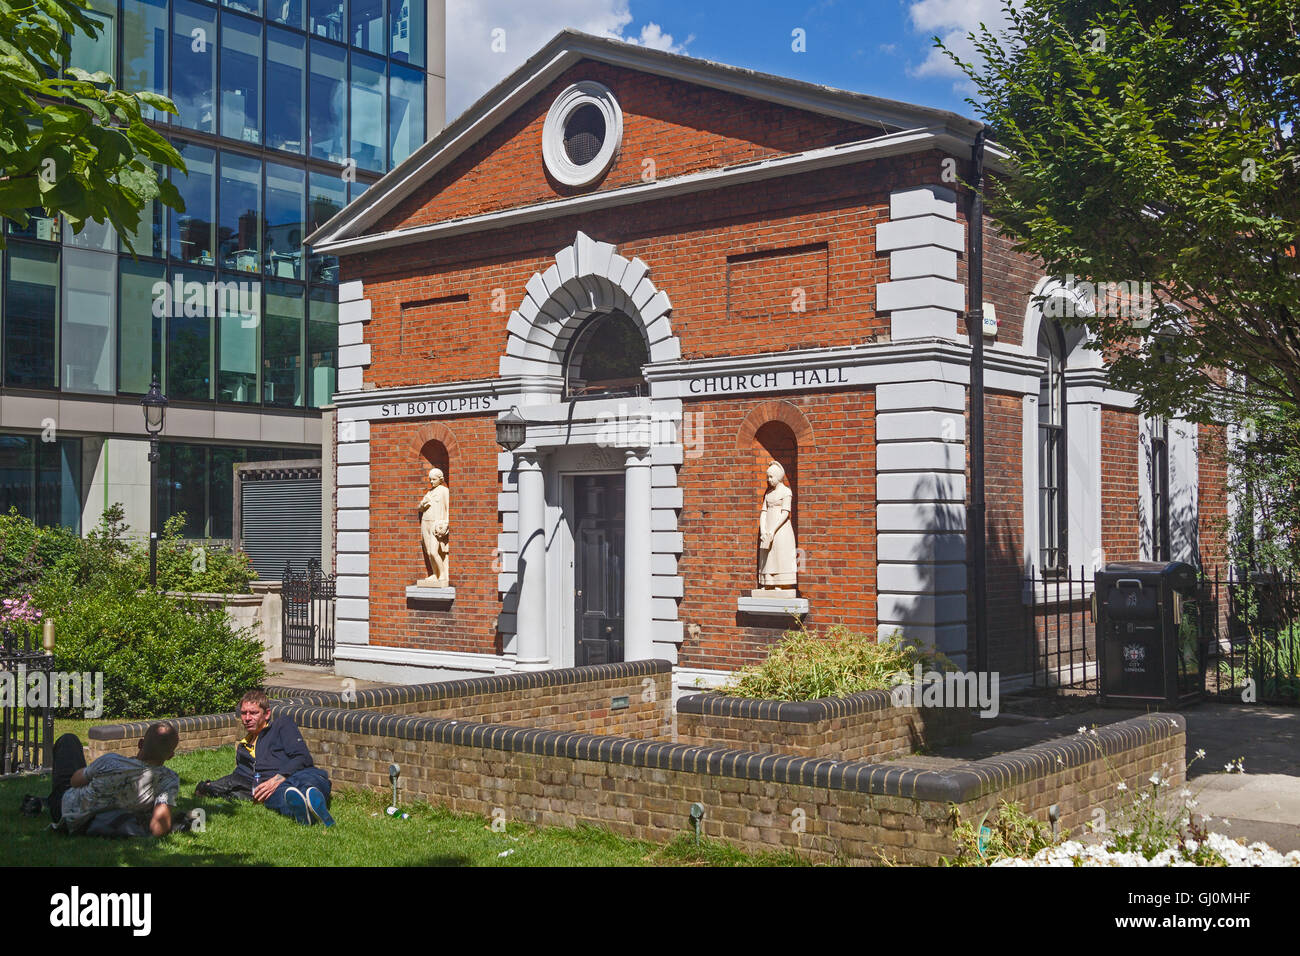 City of London   St Botolph's Church Hall in the grounds of St Botolph-without-Bishopsgate Stock Photo